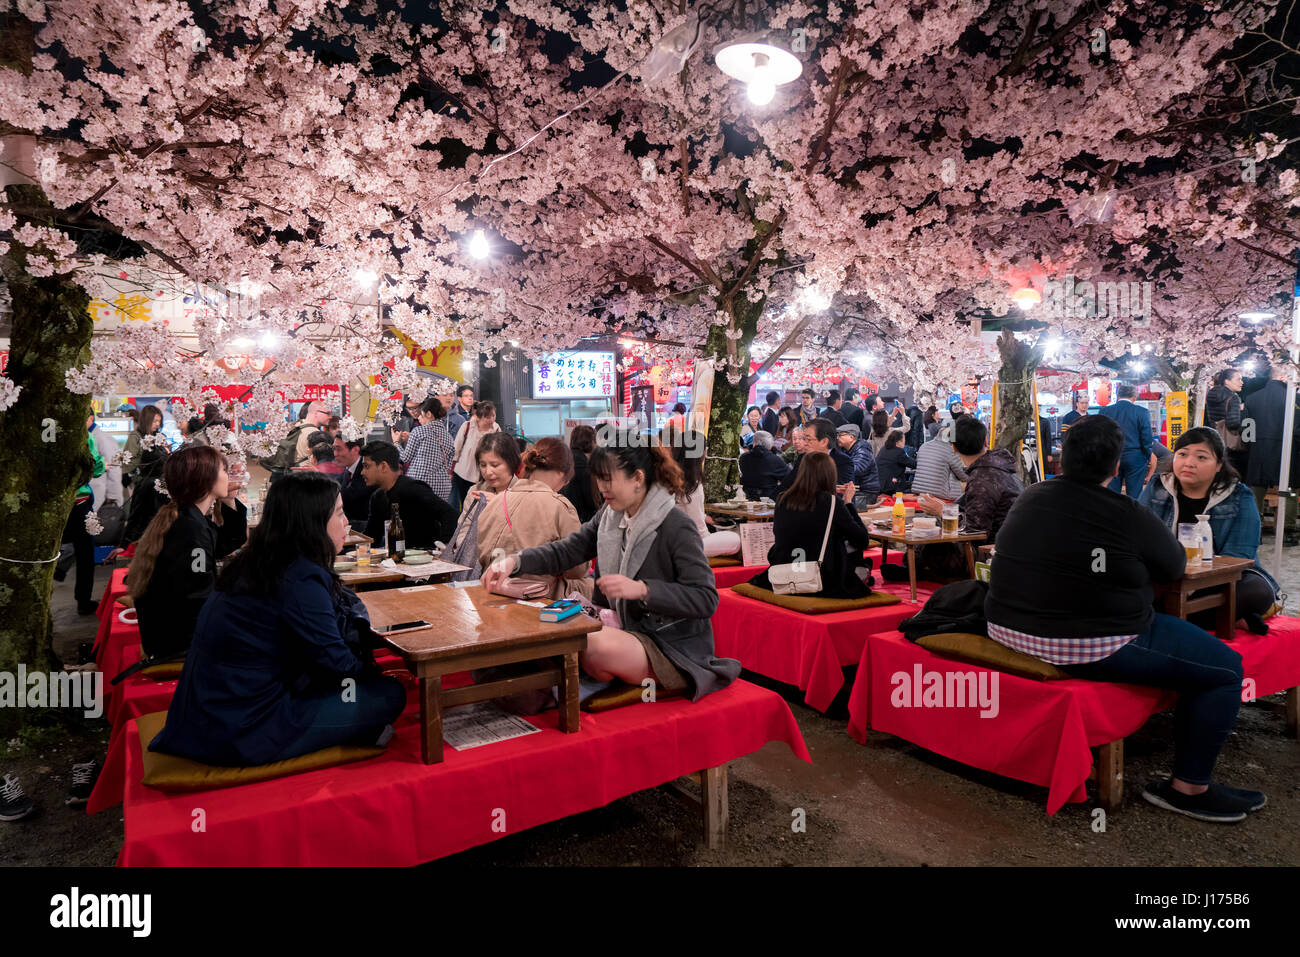 KYOTO, JAPAN - APRIL 7, 2017: Japan crowds enjoy the spring cherry blossoms in Kyoto by partaking in seasonal night Hanami festivals in Maruyama Park  Stock Photo